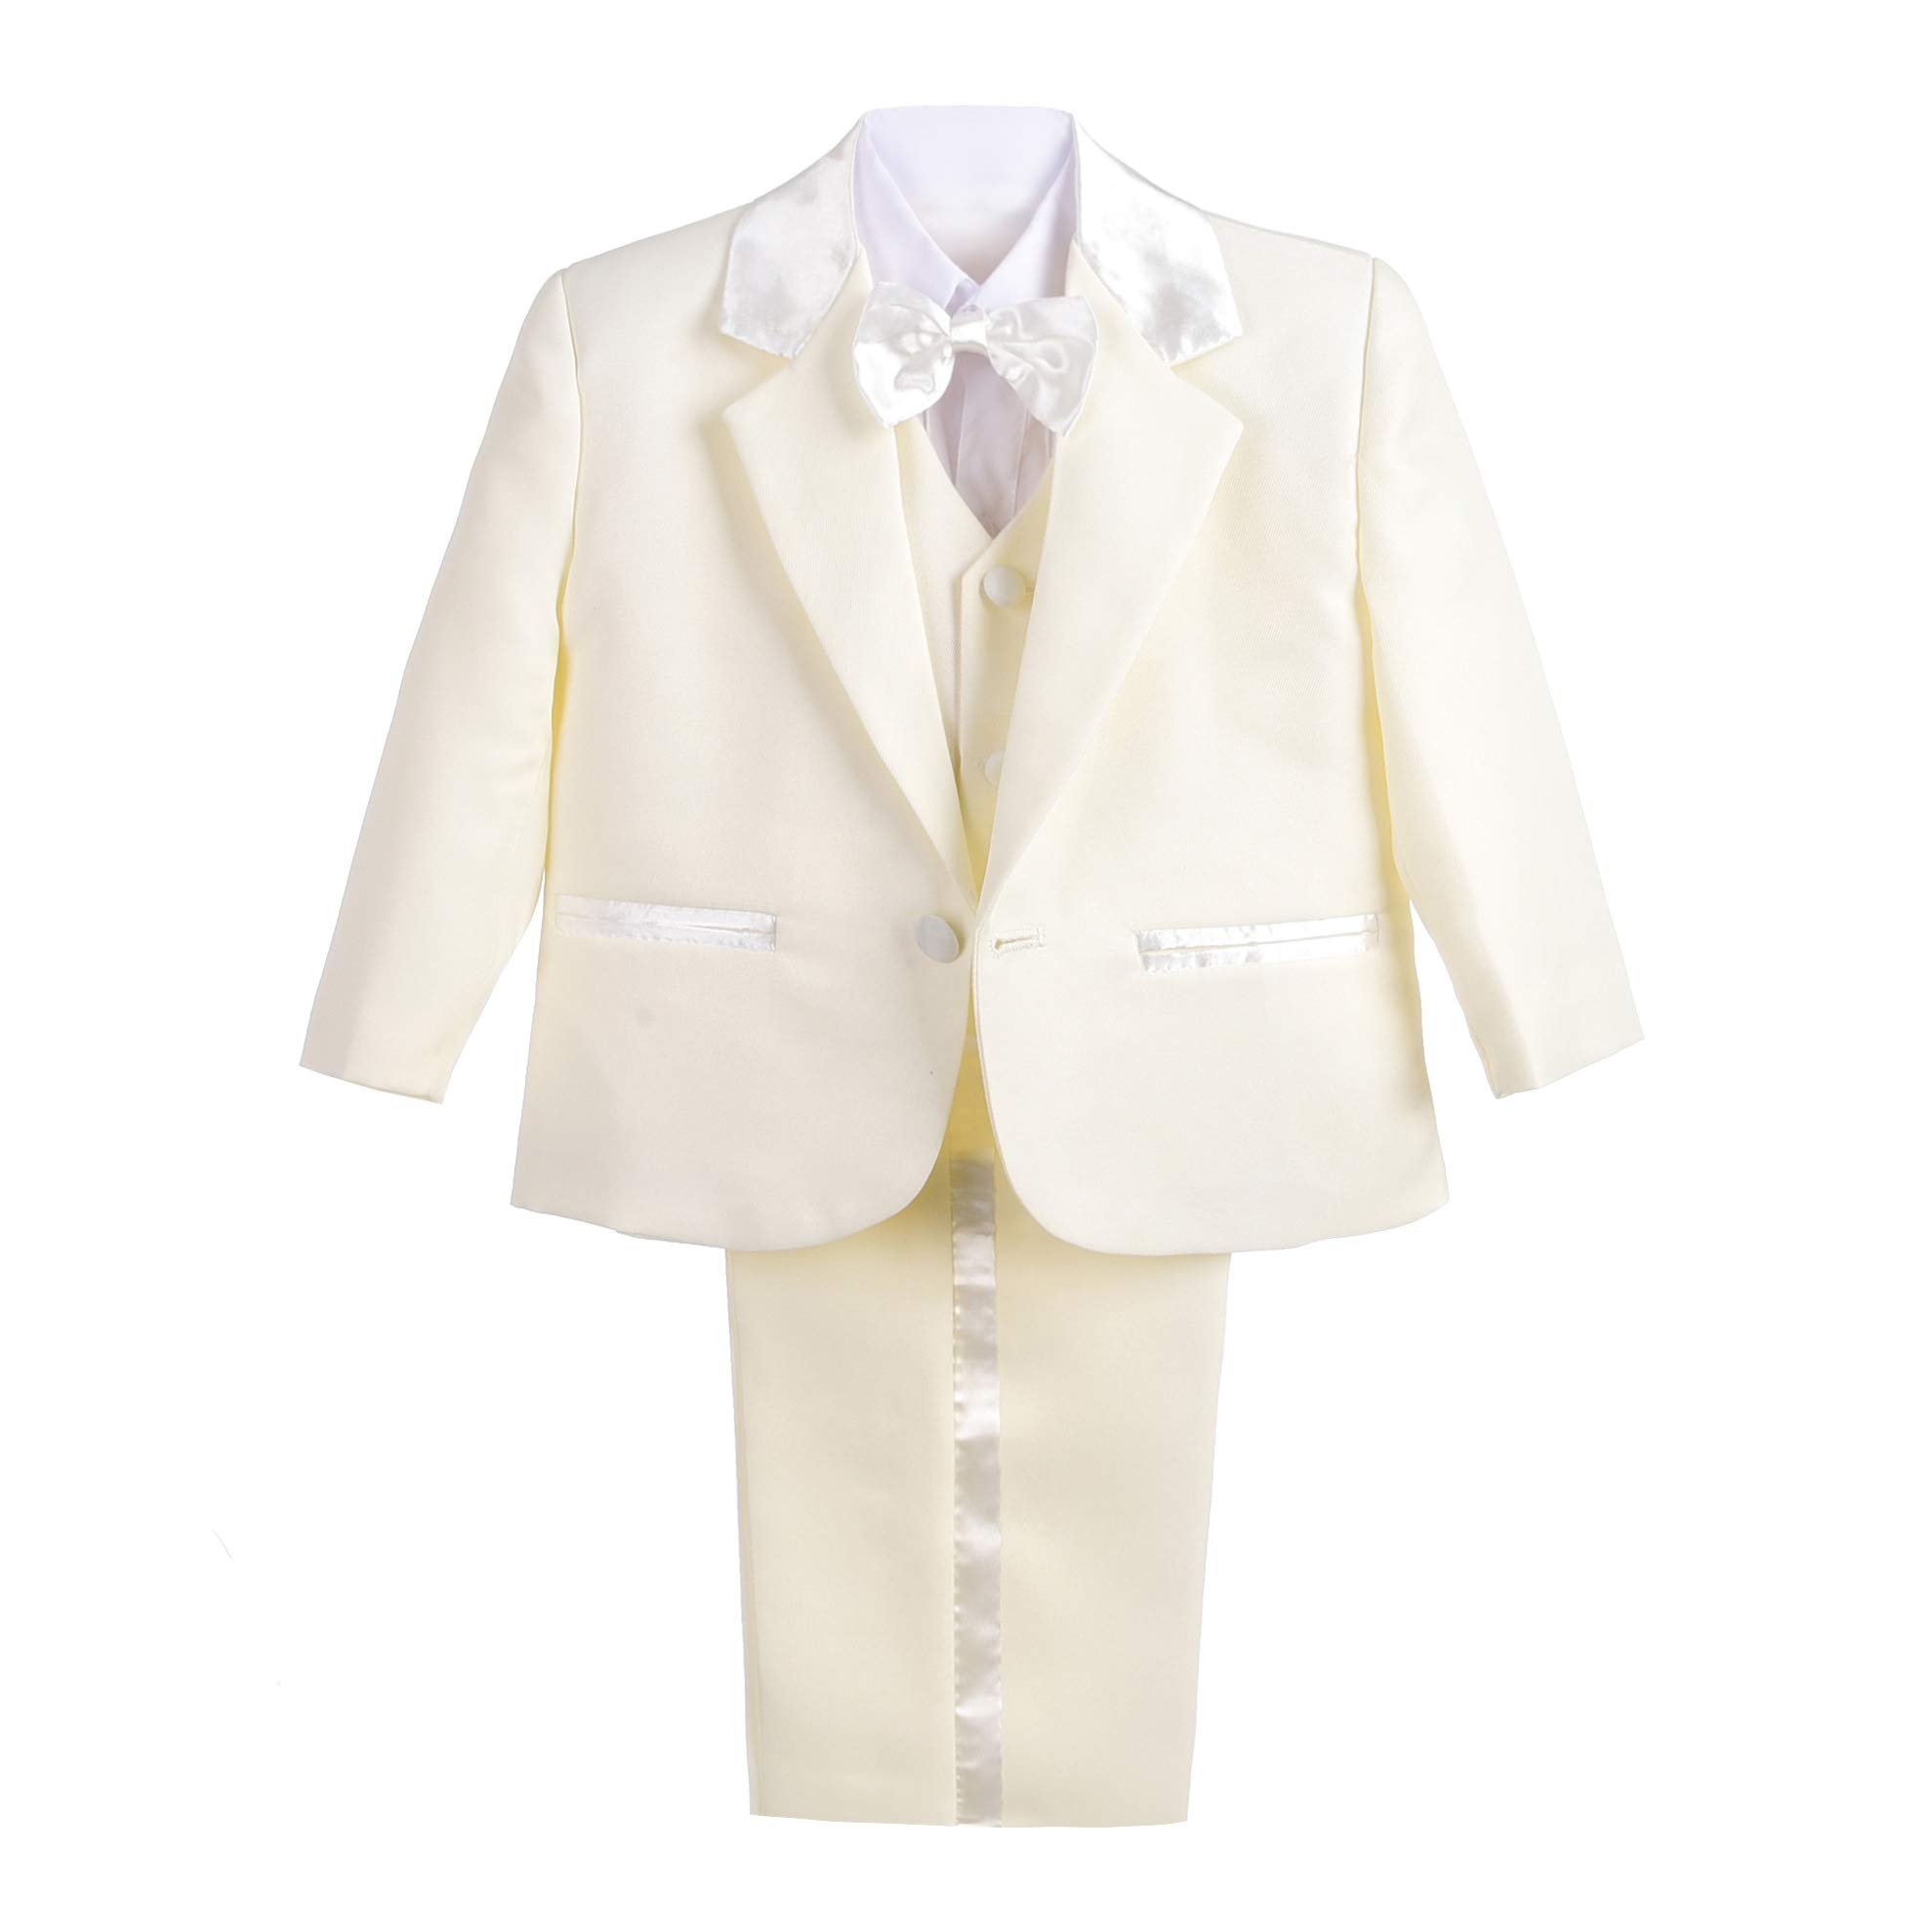 Lito Angels Baby Boys' Formal Tuxedo Suits Wedding Christening Outfits No Tail 5 Piece Set 022